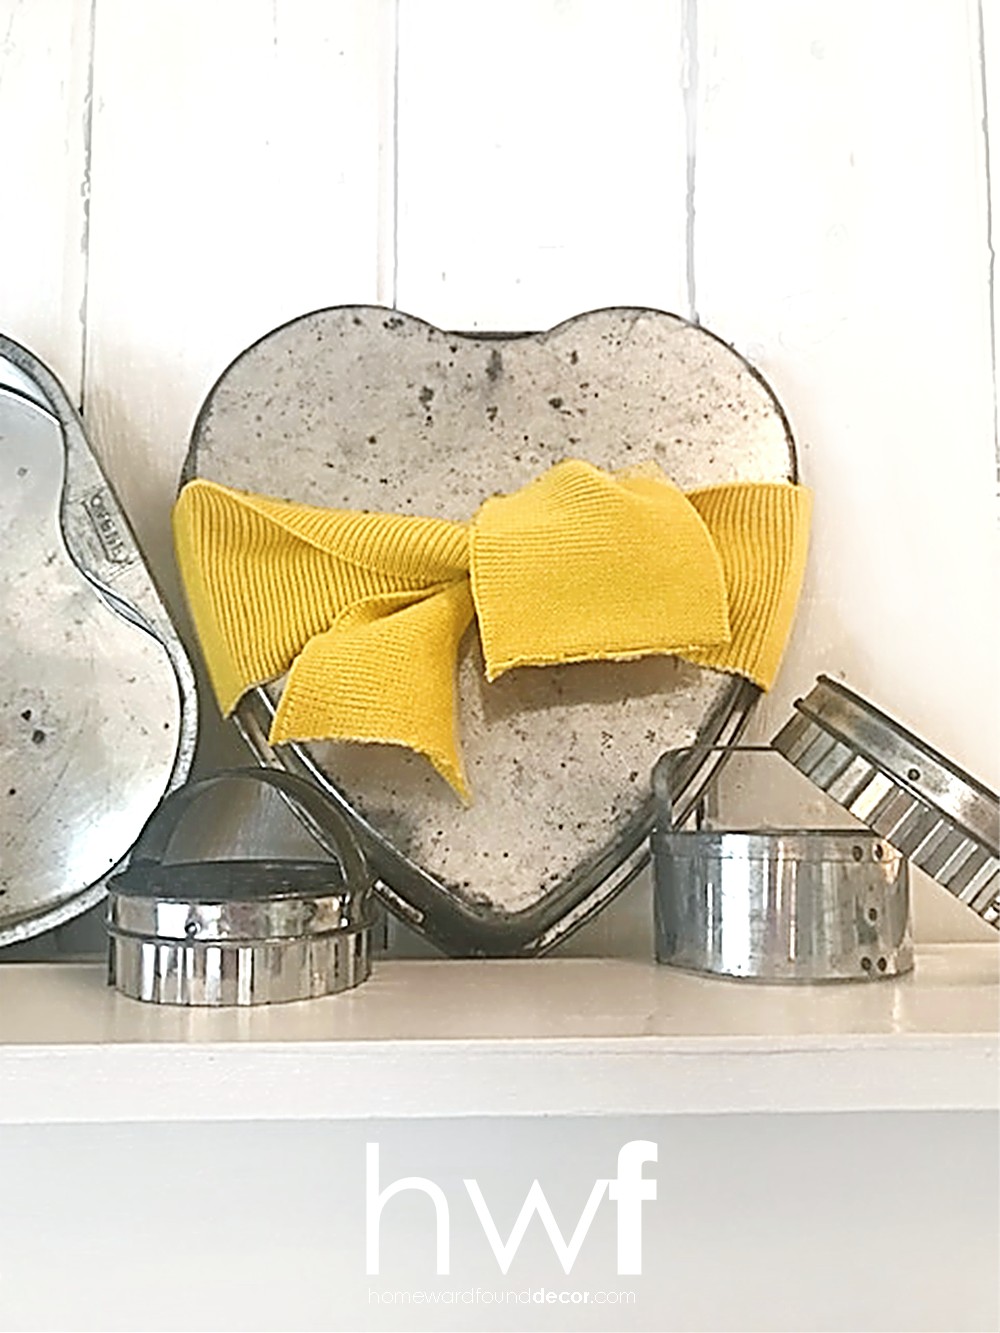 Valentine's Day Home Decor from Heart Cake Pans